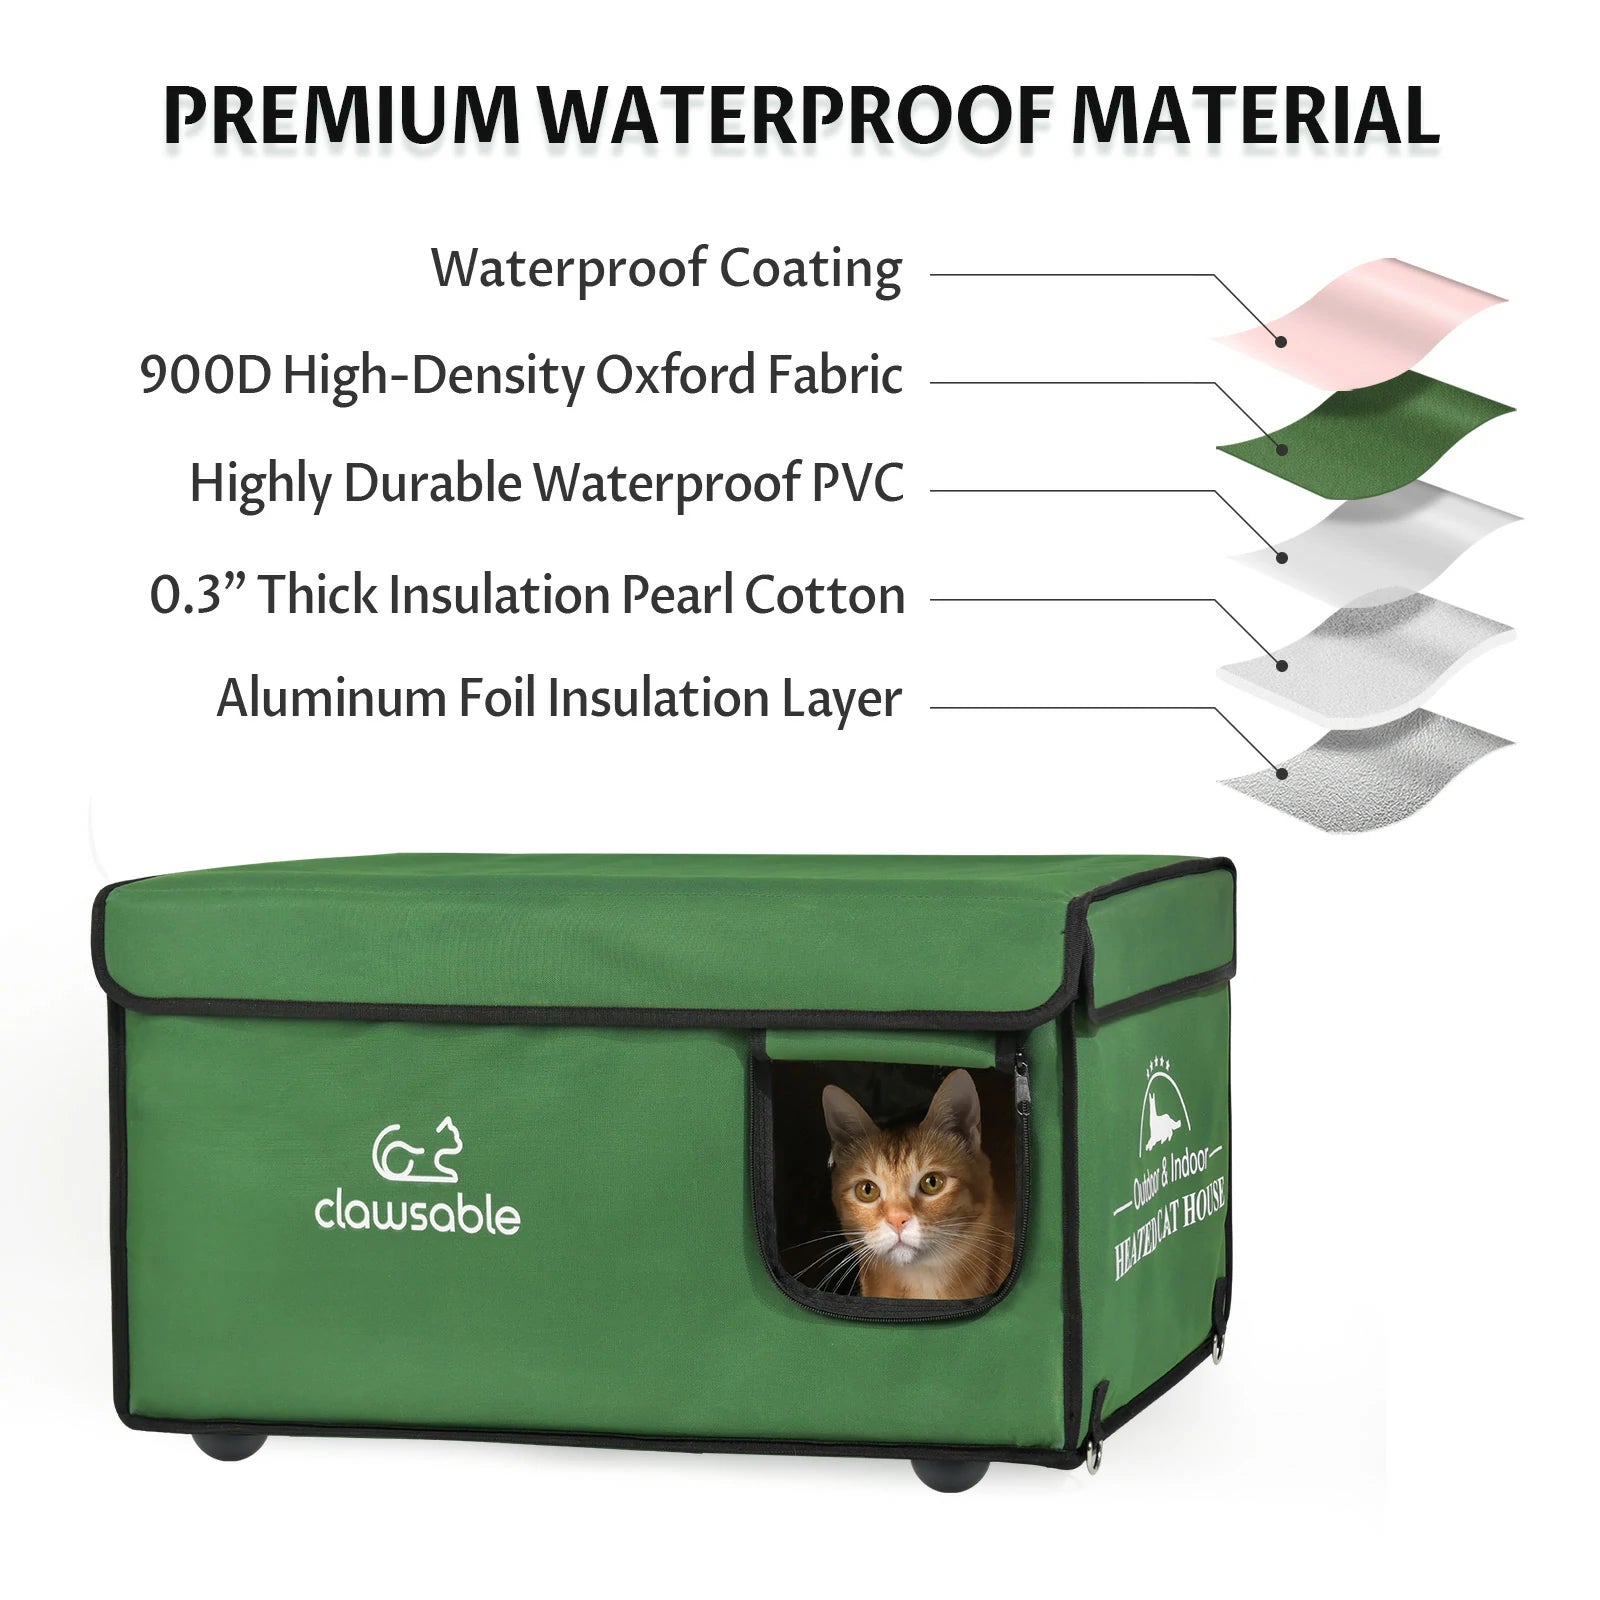 2 in 1 Outdoor Elevated Top-Openable Insulation Cat House – Clawsable